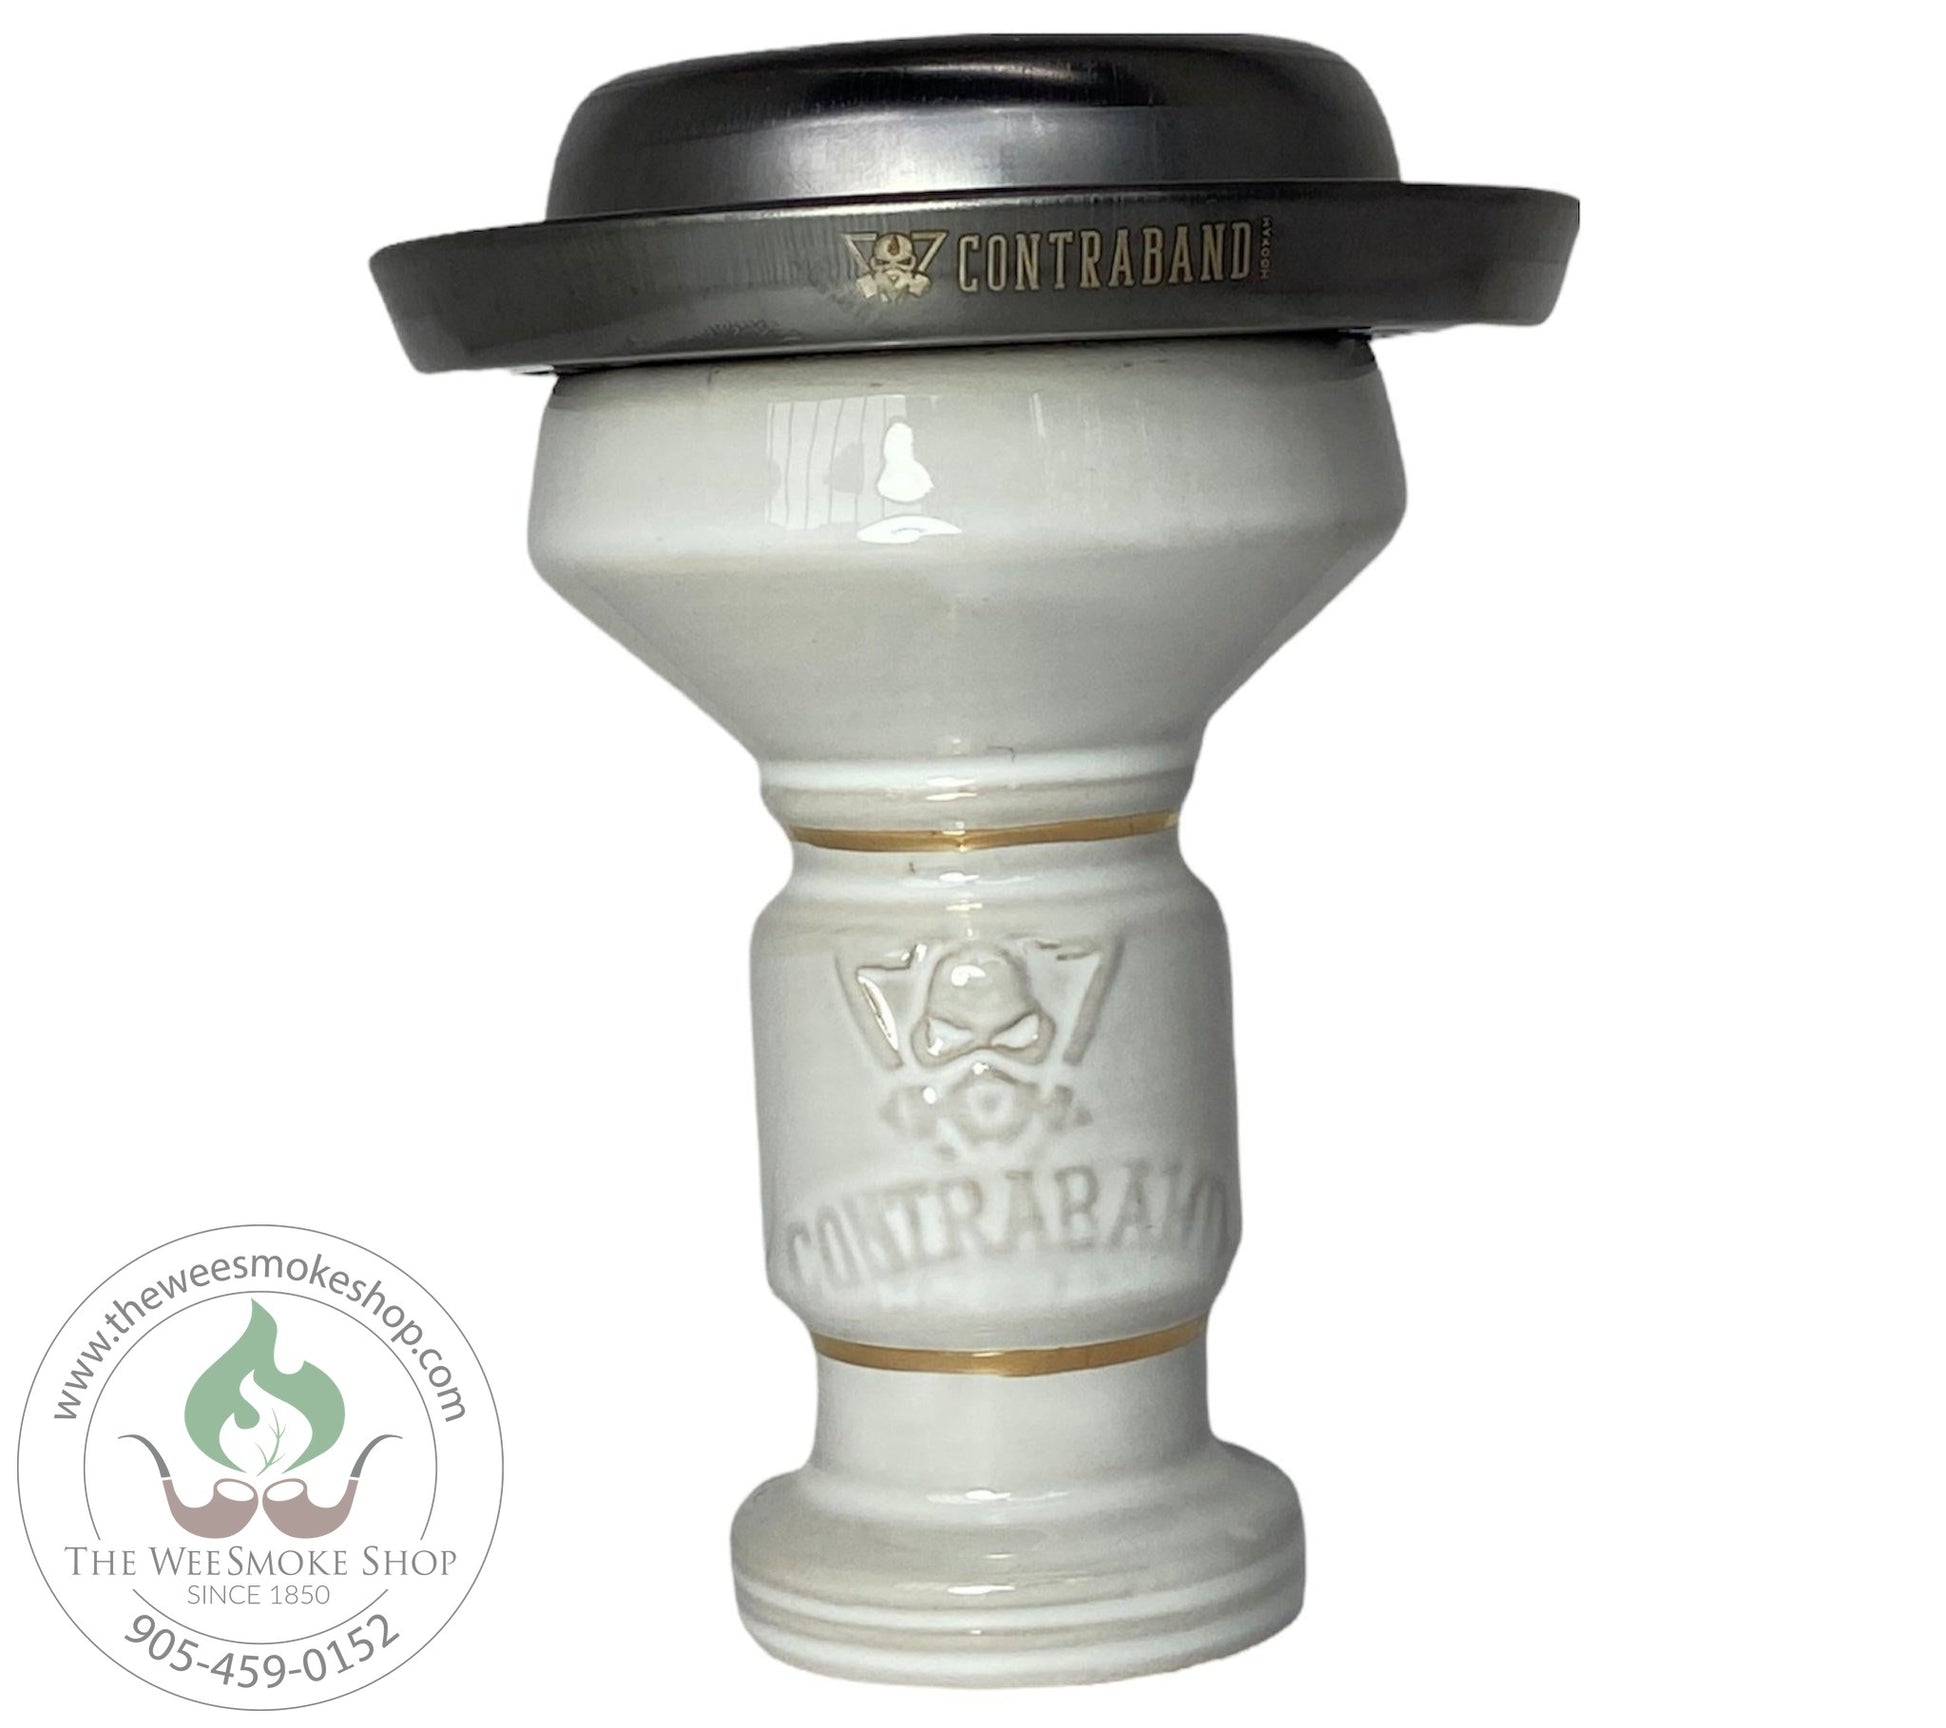 White Contraband Hookah Bowl with Heat Management Device - Hookah Accessories - Wee Smoke Shop